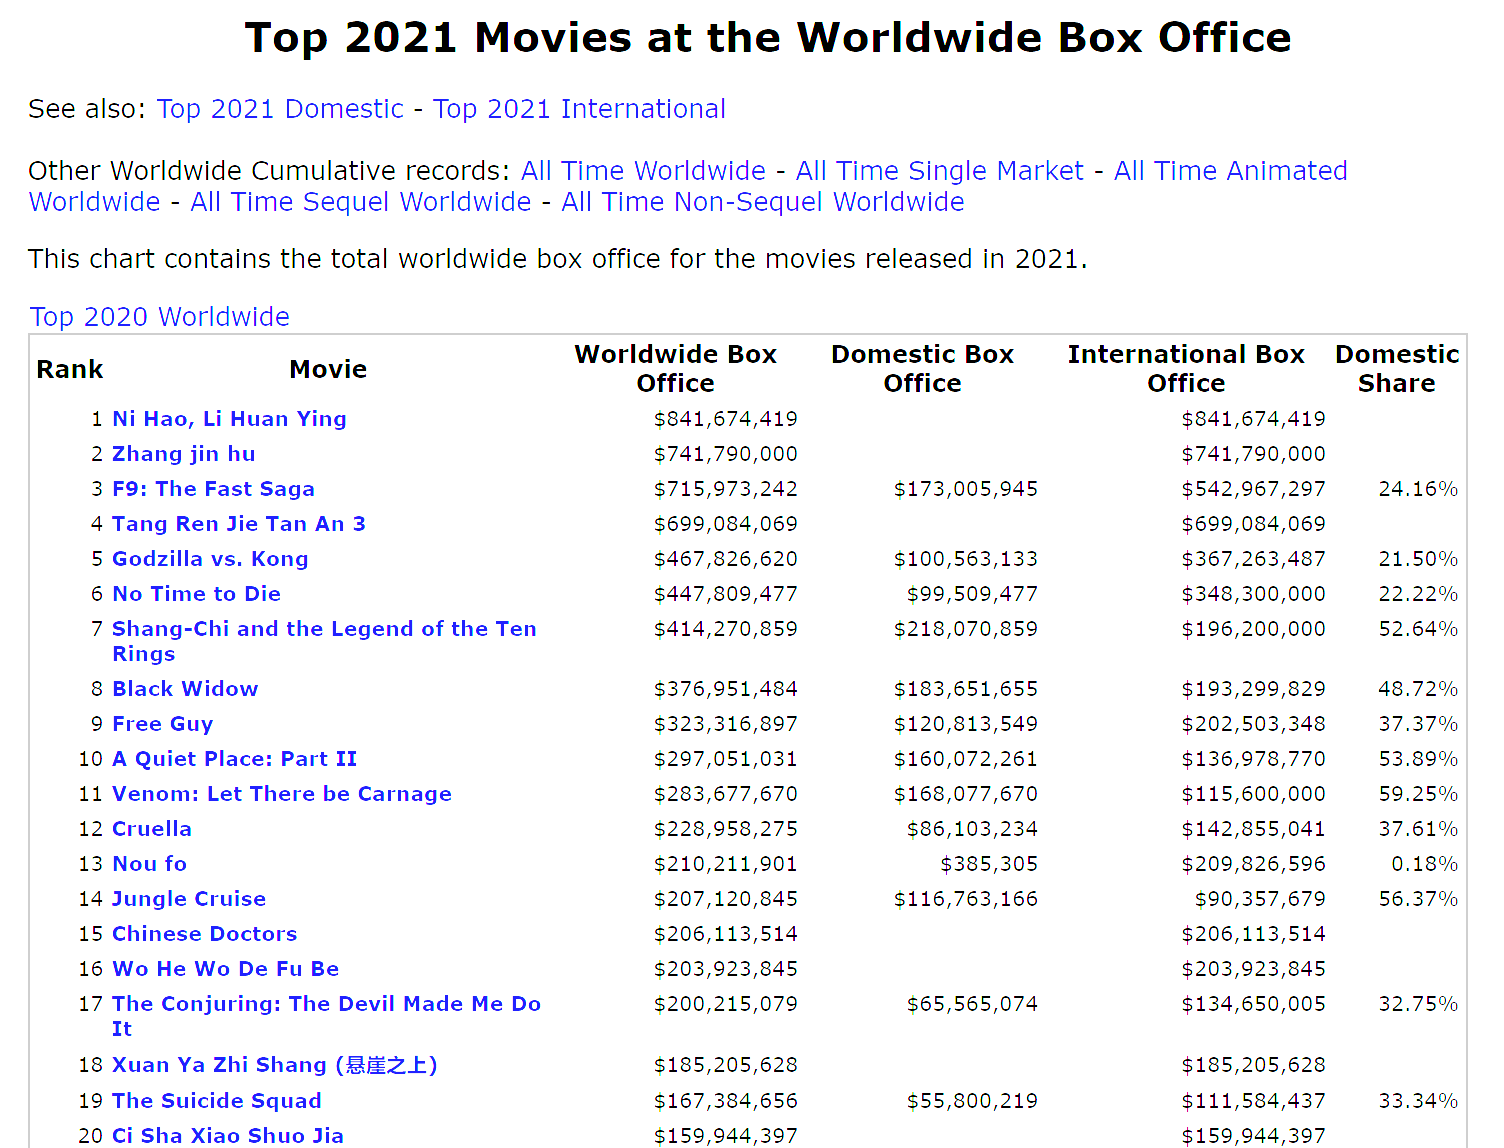 Streaming Effects On Box Office With China